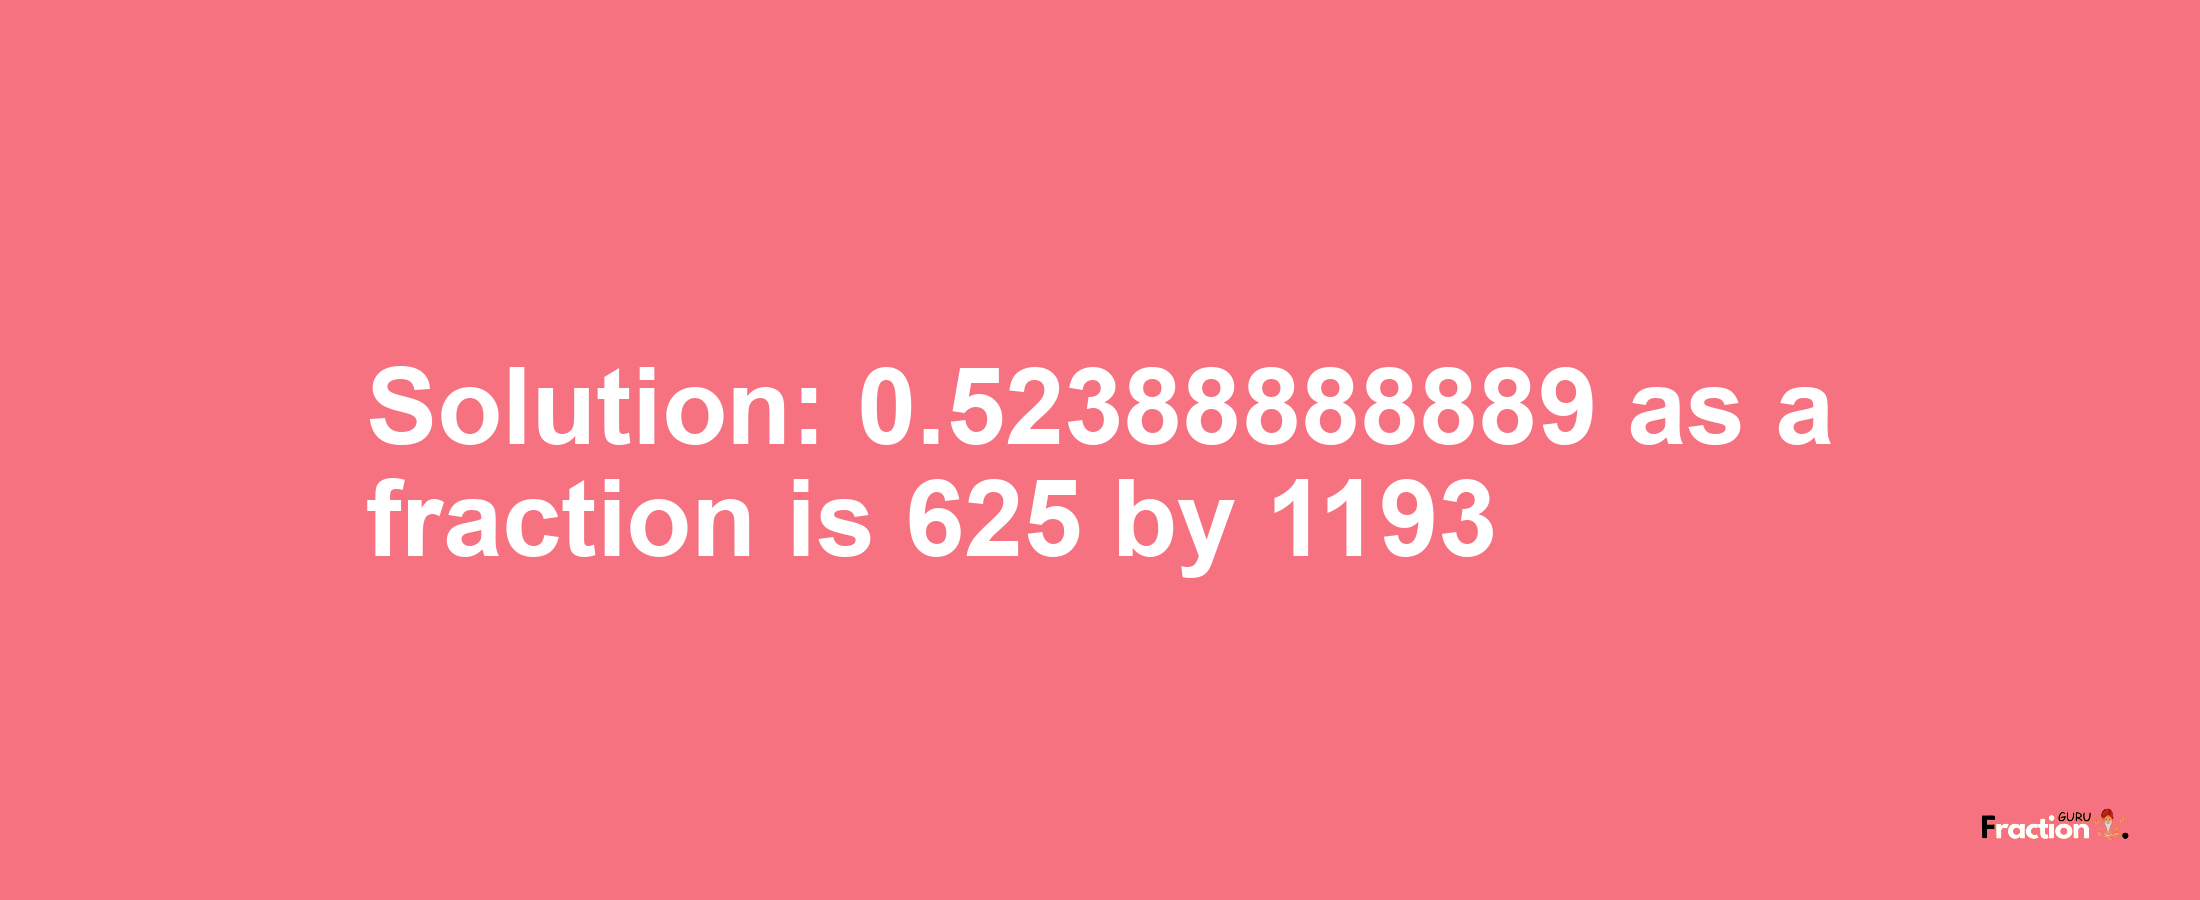 Solution:0.52388888889 as a fraction is 625/1193